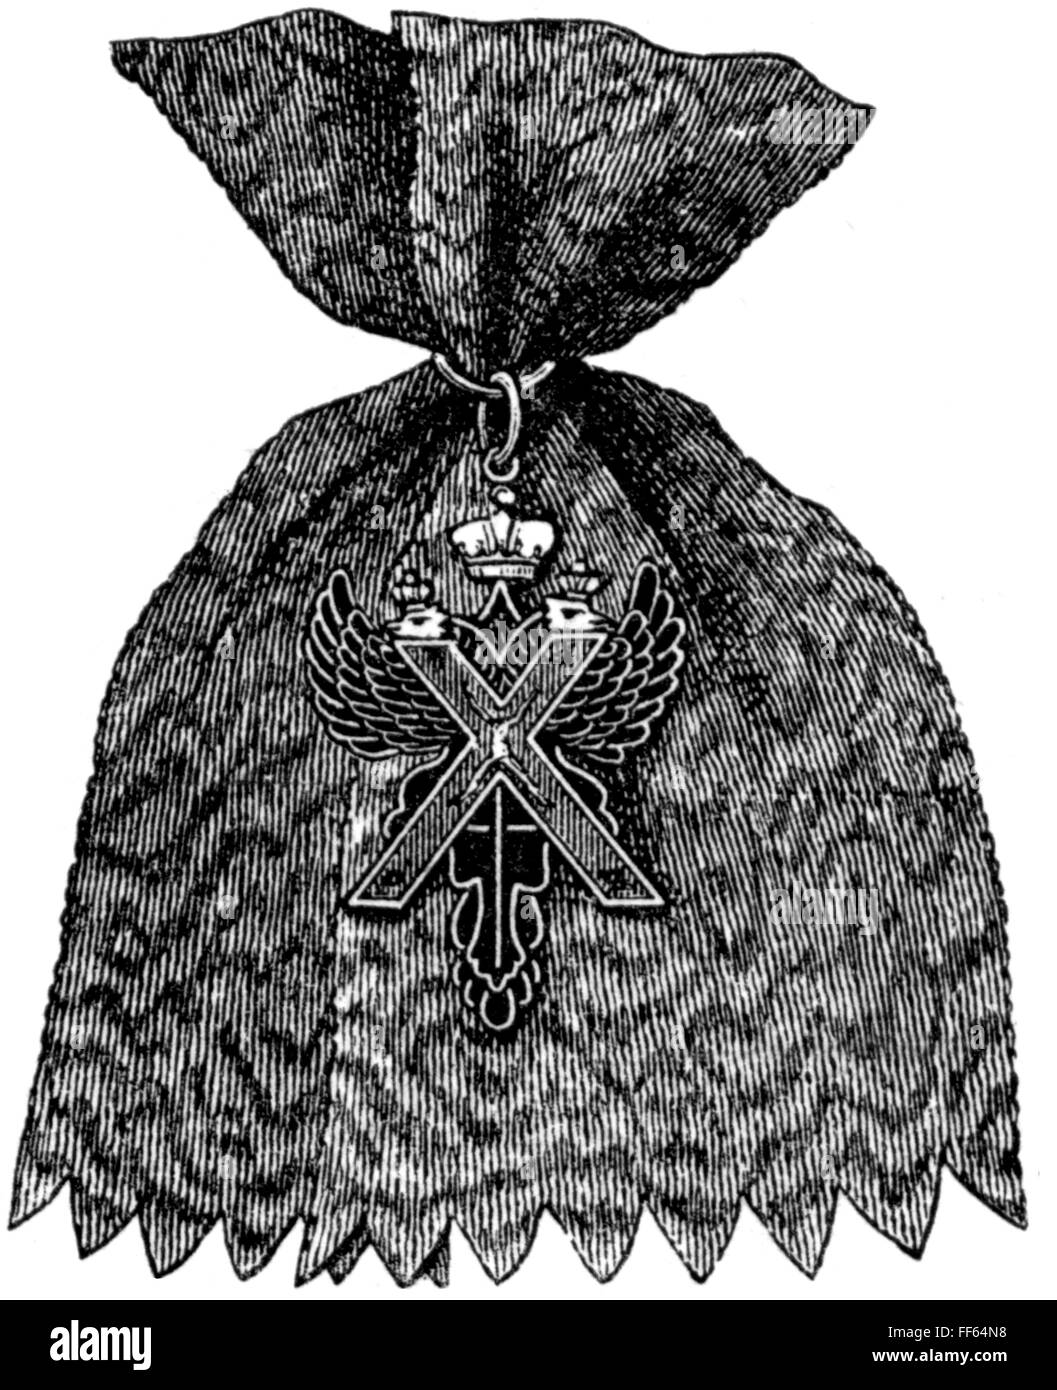 medals and decorations, Russia, Order of Saint Andrew, founded 10.12.1698 by Czar Peter I "the Great" of Russia, badge, wood engraving, 2nd half 19th century, Additional-Rights-Clearences-Not Available Stock Photo